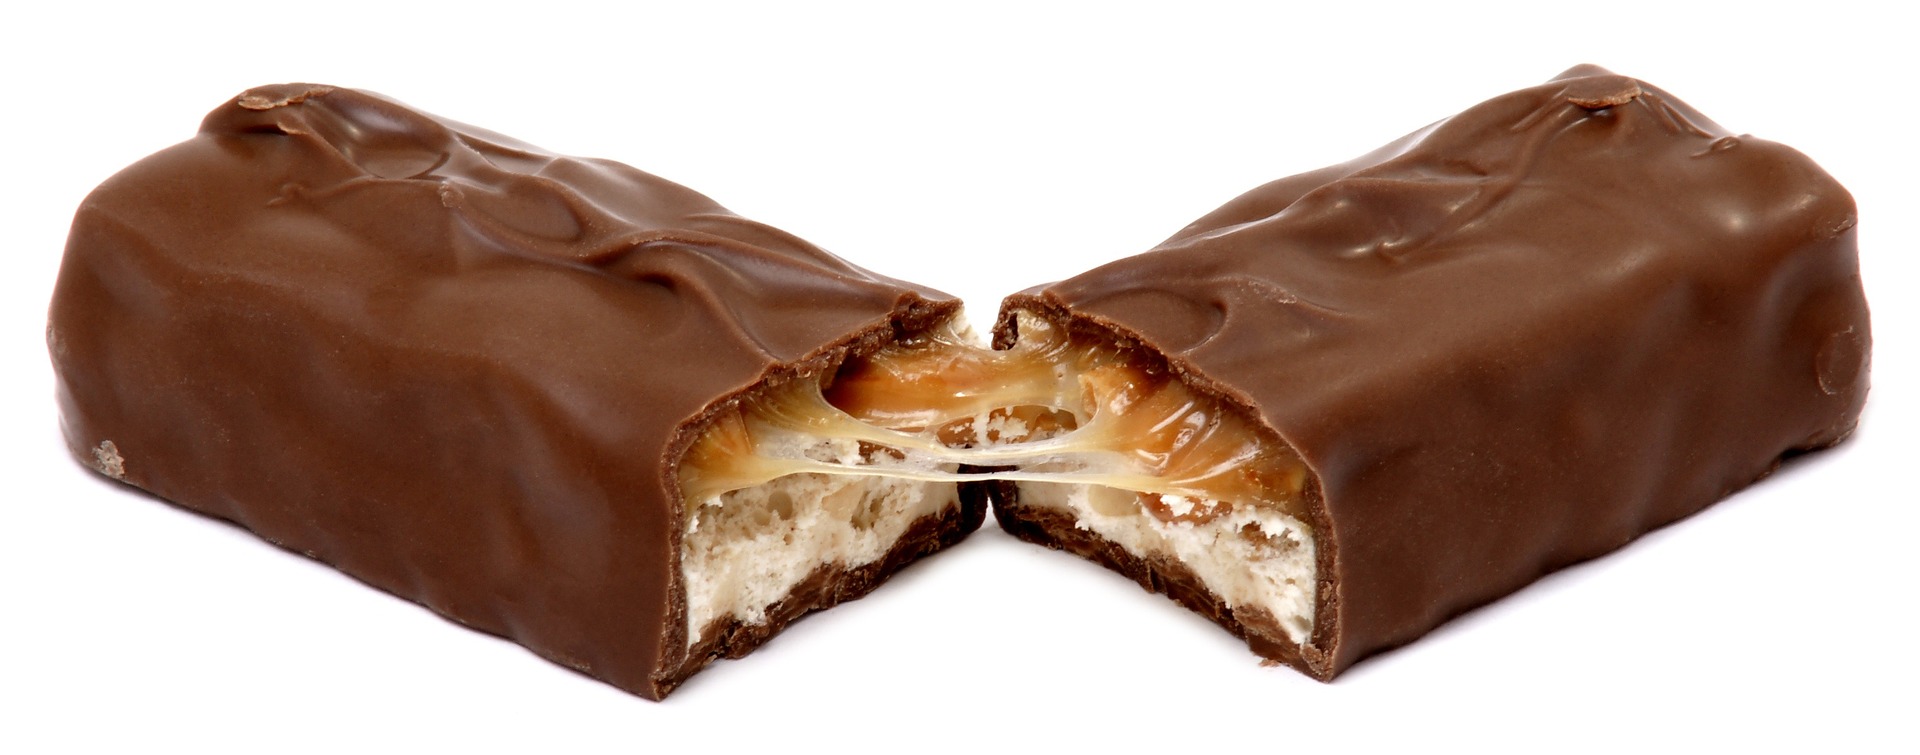 Are Snickers Healthy? Can It Curb Your Hunger?